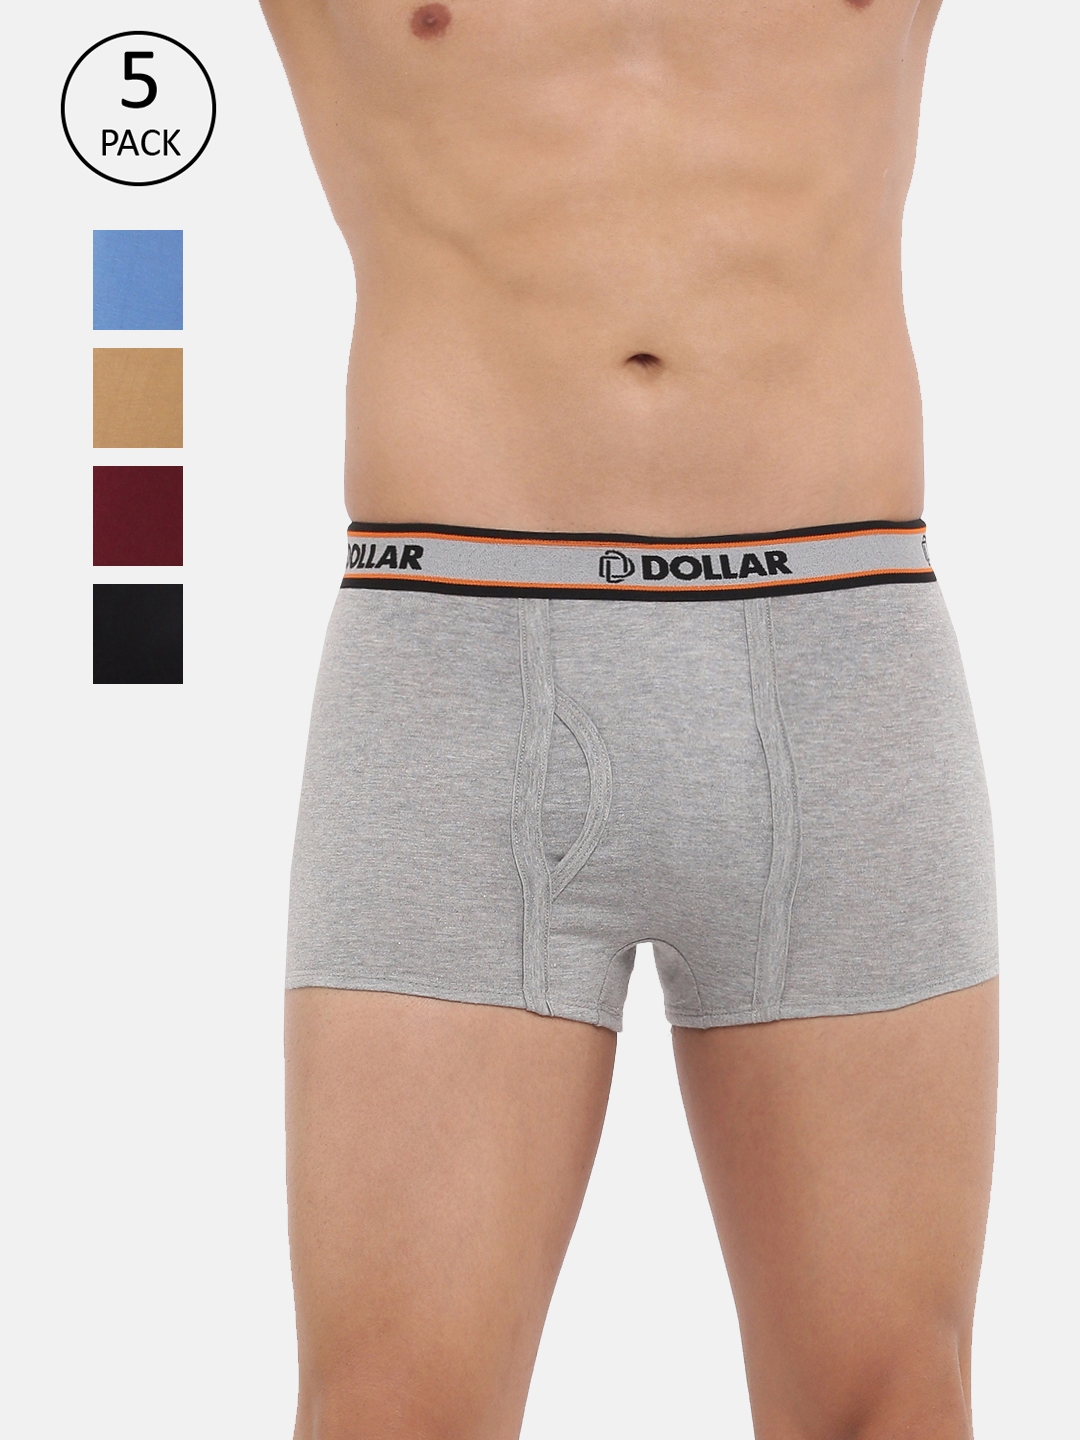 Dollar Bigboss Men Cotton Double Pouch Support Brief - Buy